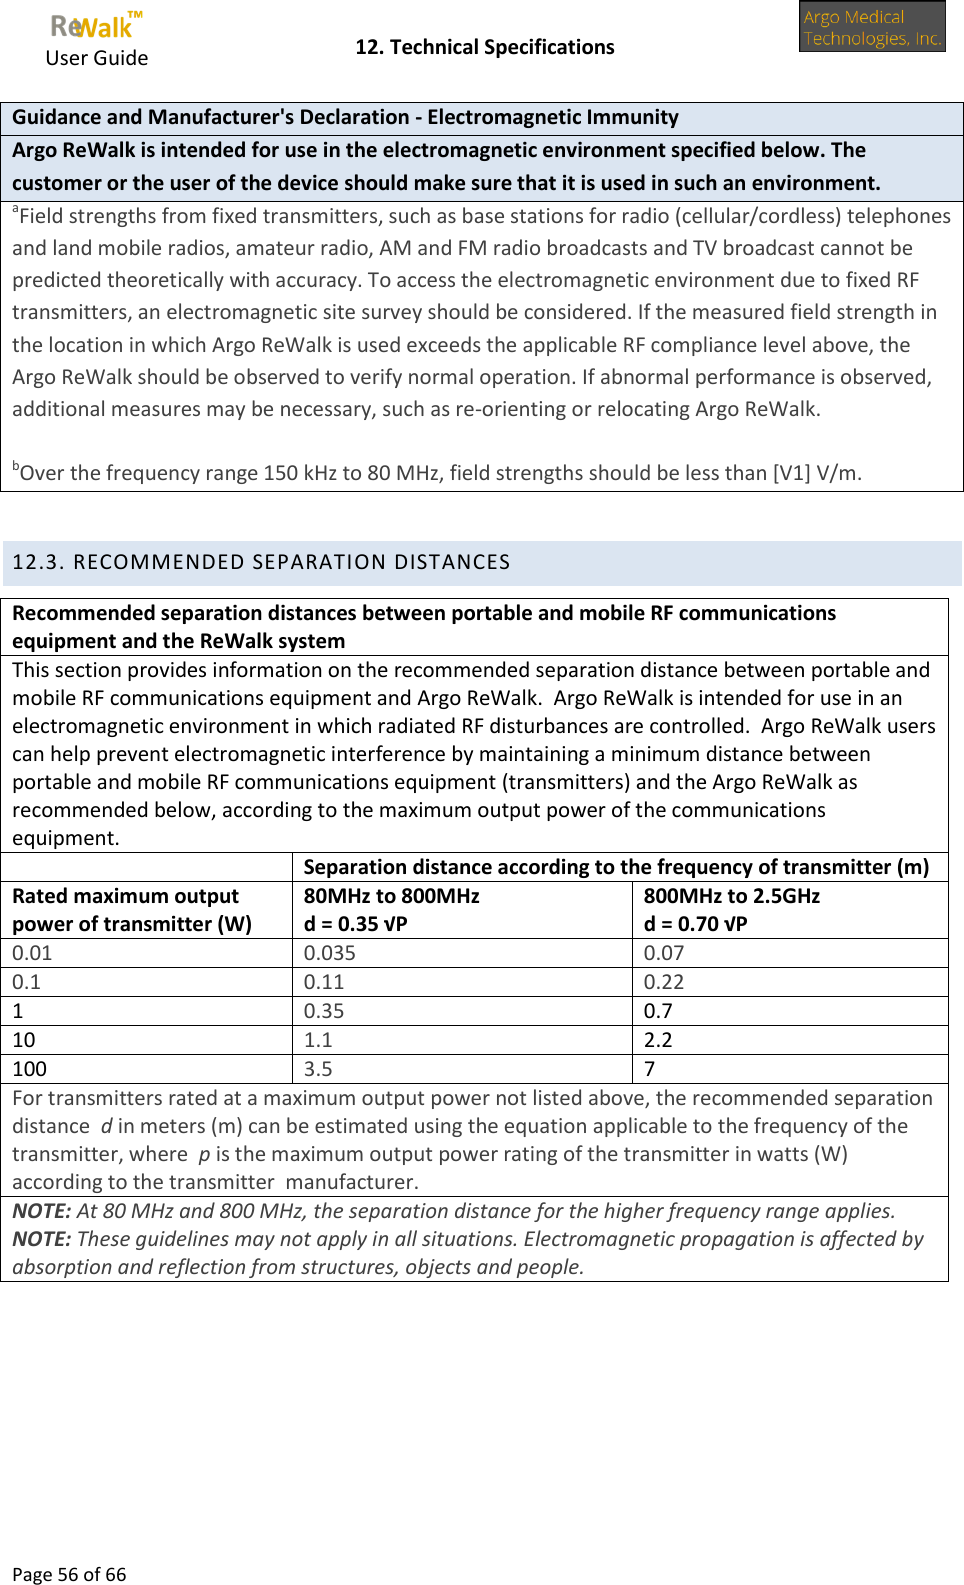     User Guide    12. Technical Specifications  Page 56 of 66  Guidance and Manufacturer&apos;s Declaration - Electromagnetic Immunity Argo ReWalk is intended for use in the electromagnetic environment specified below. The customer or the user of the device should make sure that it is used in such an environment. aField strengths from fixed transmitters, such as base stations for radio (cellular/cordless) telephones and land mobile radios, amateur radio, AM and FM radio broadcasts and TV broadcast cannot be predicted theoretically with accuracy. To access the electromagnetic environment due to fixed RF transmitters, an electromagnetic site survey should be considered. If the measured field strength in the location in which Argo ReWalk is used exceeds the applicable RF compliance level above, the Argo ReWalk should be observed to verify normal operation. If abnormal performance is observed, additional measures may be necessary, such as re-orienting or relocating Argo ReWalk.  bOver the frequency range 150 kHz to 80 MHz, field strengths should be less than [V1] V/m.  12.3. RECOMMENDED SEPARATION DISTANCES Recommended separation distances between portable and mobile RF communications equipment and the ReWalk system This section provides information on the recommended separation distance between portable and mobile RF communications equipment and Argo ReWalk.  Argo ReWalk is intended for use in an electromagnetic environment in which radiated RF disturbances are controlled.  Argo ReWalk users can help prevent electromagnetic interference by maintaining a minimum distance between portable and mobile RF communications equipment (transmitters) and the Argo ReWalk as recommended below, according to the maximum output power of the communications equipment.  Separation distance according to the frequency of transmitter (m) Rated maximum output power of transmitter (W) 80MHz to 800MHz d = 0.35 √P 800MHz to 2.5GHz d = 0.70 √P 0.01 0.035 0.07 0.1 0.11 0.22 1 0.35 0.7 10 1.1 2.2 100 3.5 7 For transmitters rated at a maximum output power not listed above, the recommended separation distance  d in meters (m) can be estimated using the equation applicable to the frequency of the transmitter, where  p is the maximum output power rating of the transmitter in watts (W) according to the transmitter  manufacturer. NOTE: At 80 MHz and 800 MHz, the separation distance for the higher frequency range applies. NOTE: These guidelines may not apply in all situations. Electromagnetic propagation is affected by absorption and reflection from structures, objects and people.      